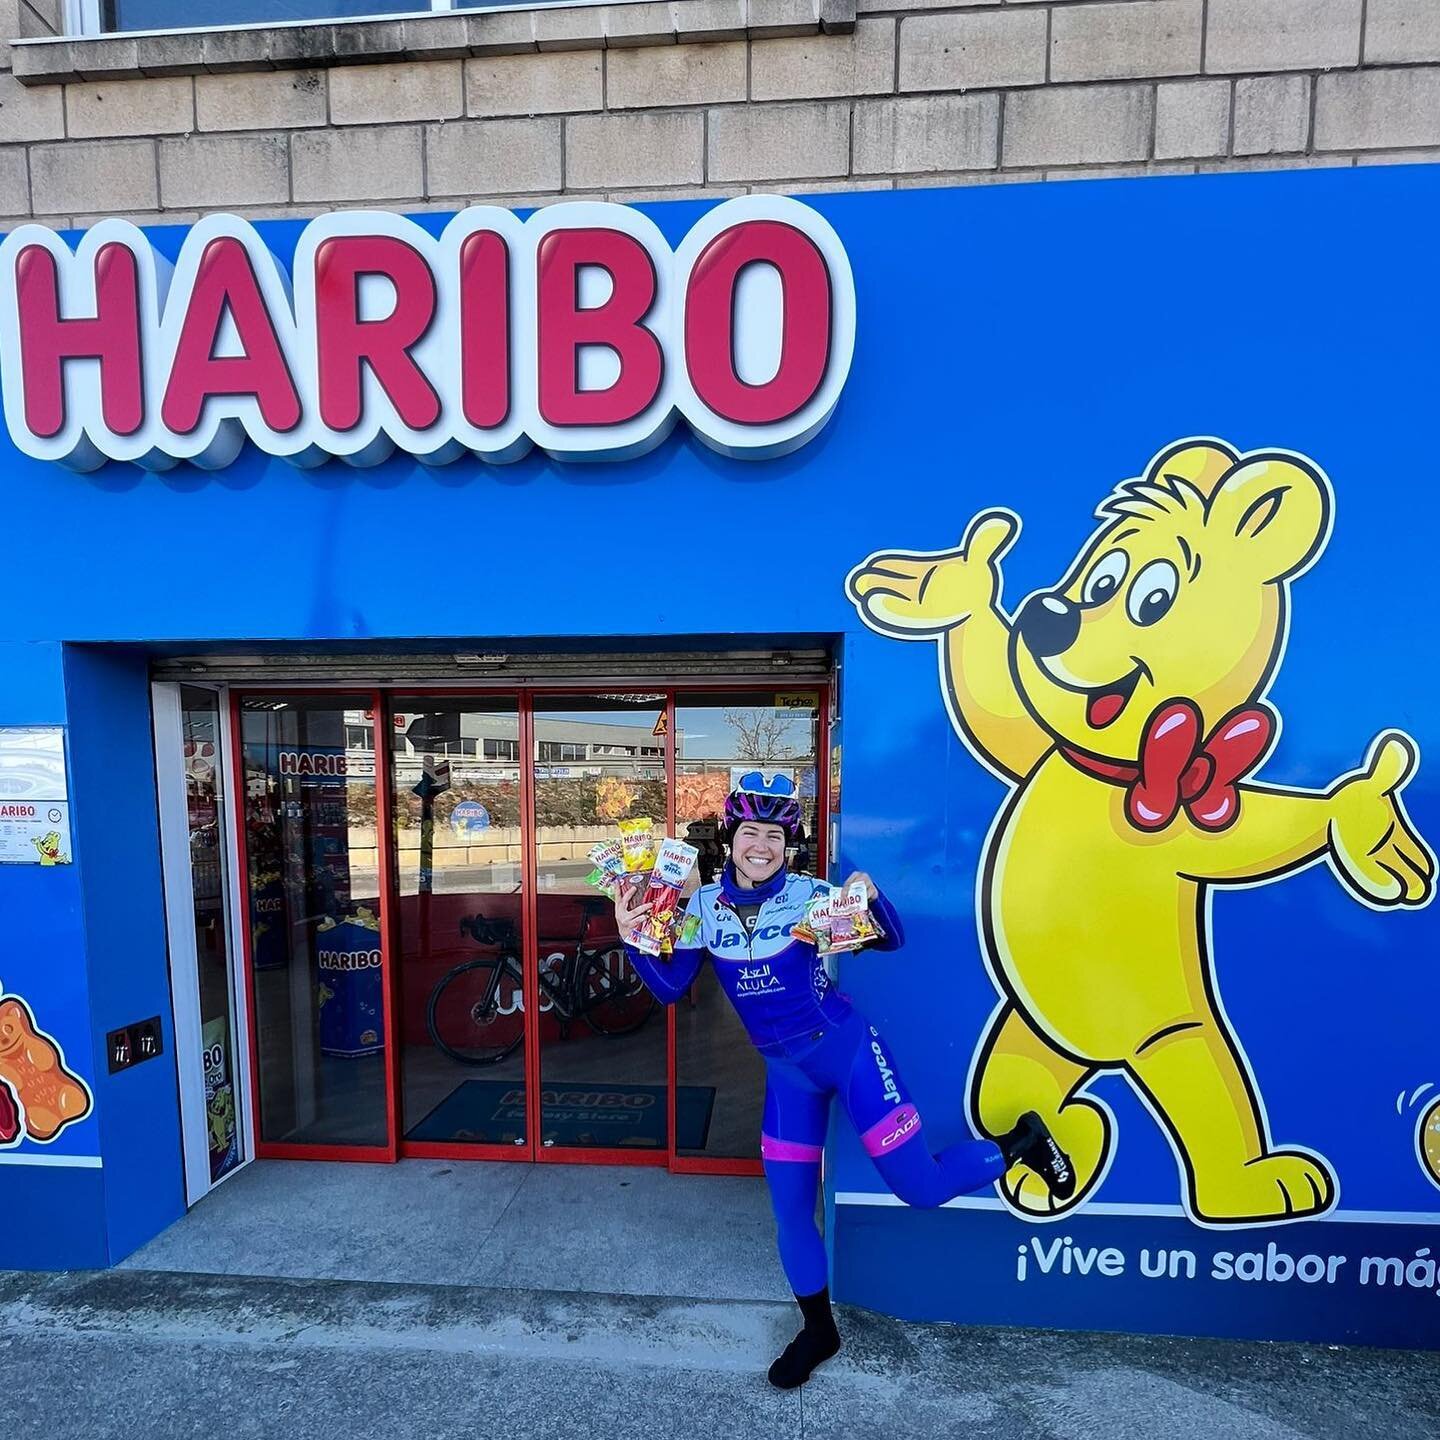 😋 Rode to the Haribo factory! I shoved my pockets and handlebar bag as full as they could go 🤭 🐷. A fun bucket list ride when you visit girona.  Which flavor is your favorite? I like the strawberry sticks 🍓🥢 😋.

@haribo_es
📸 @smedgey1